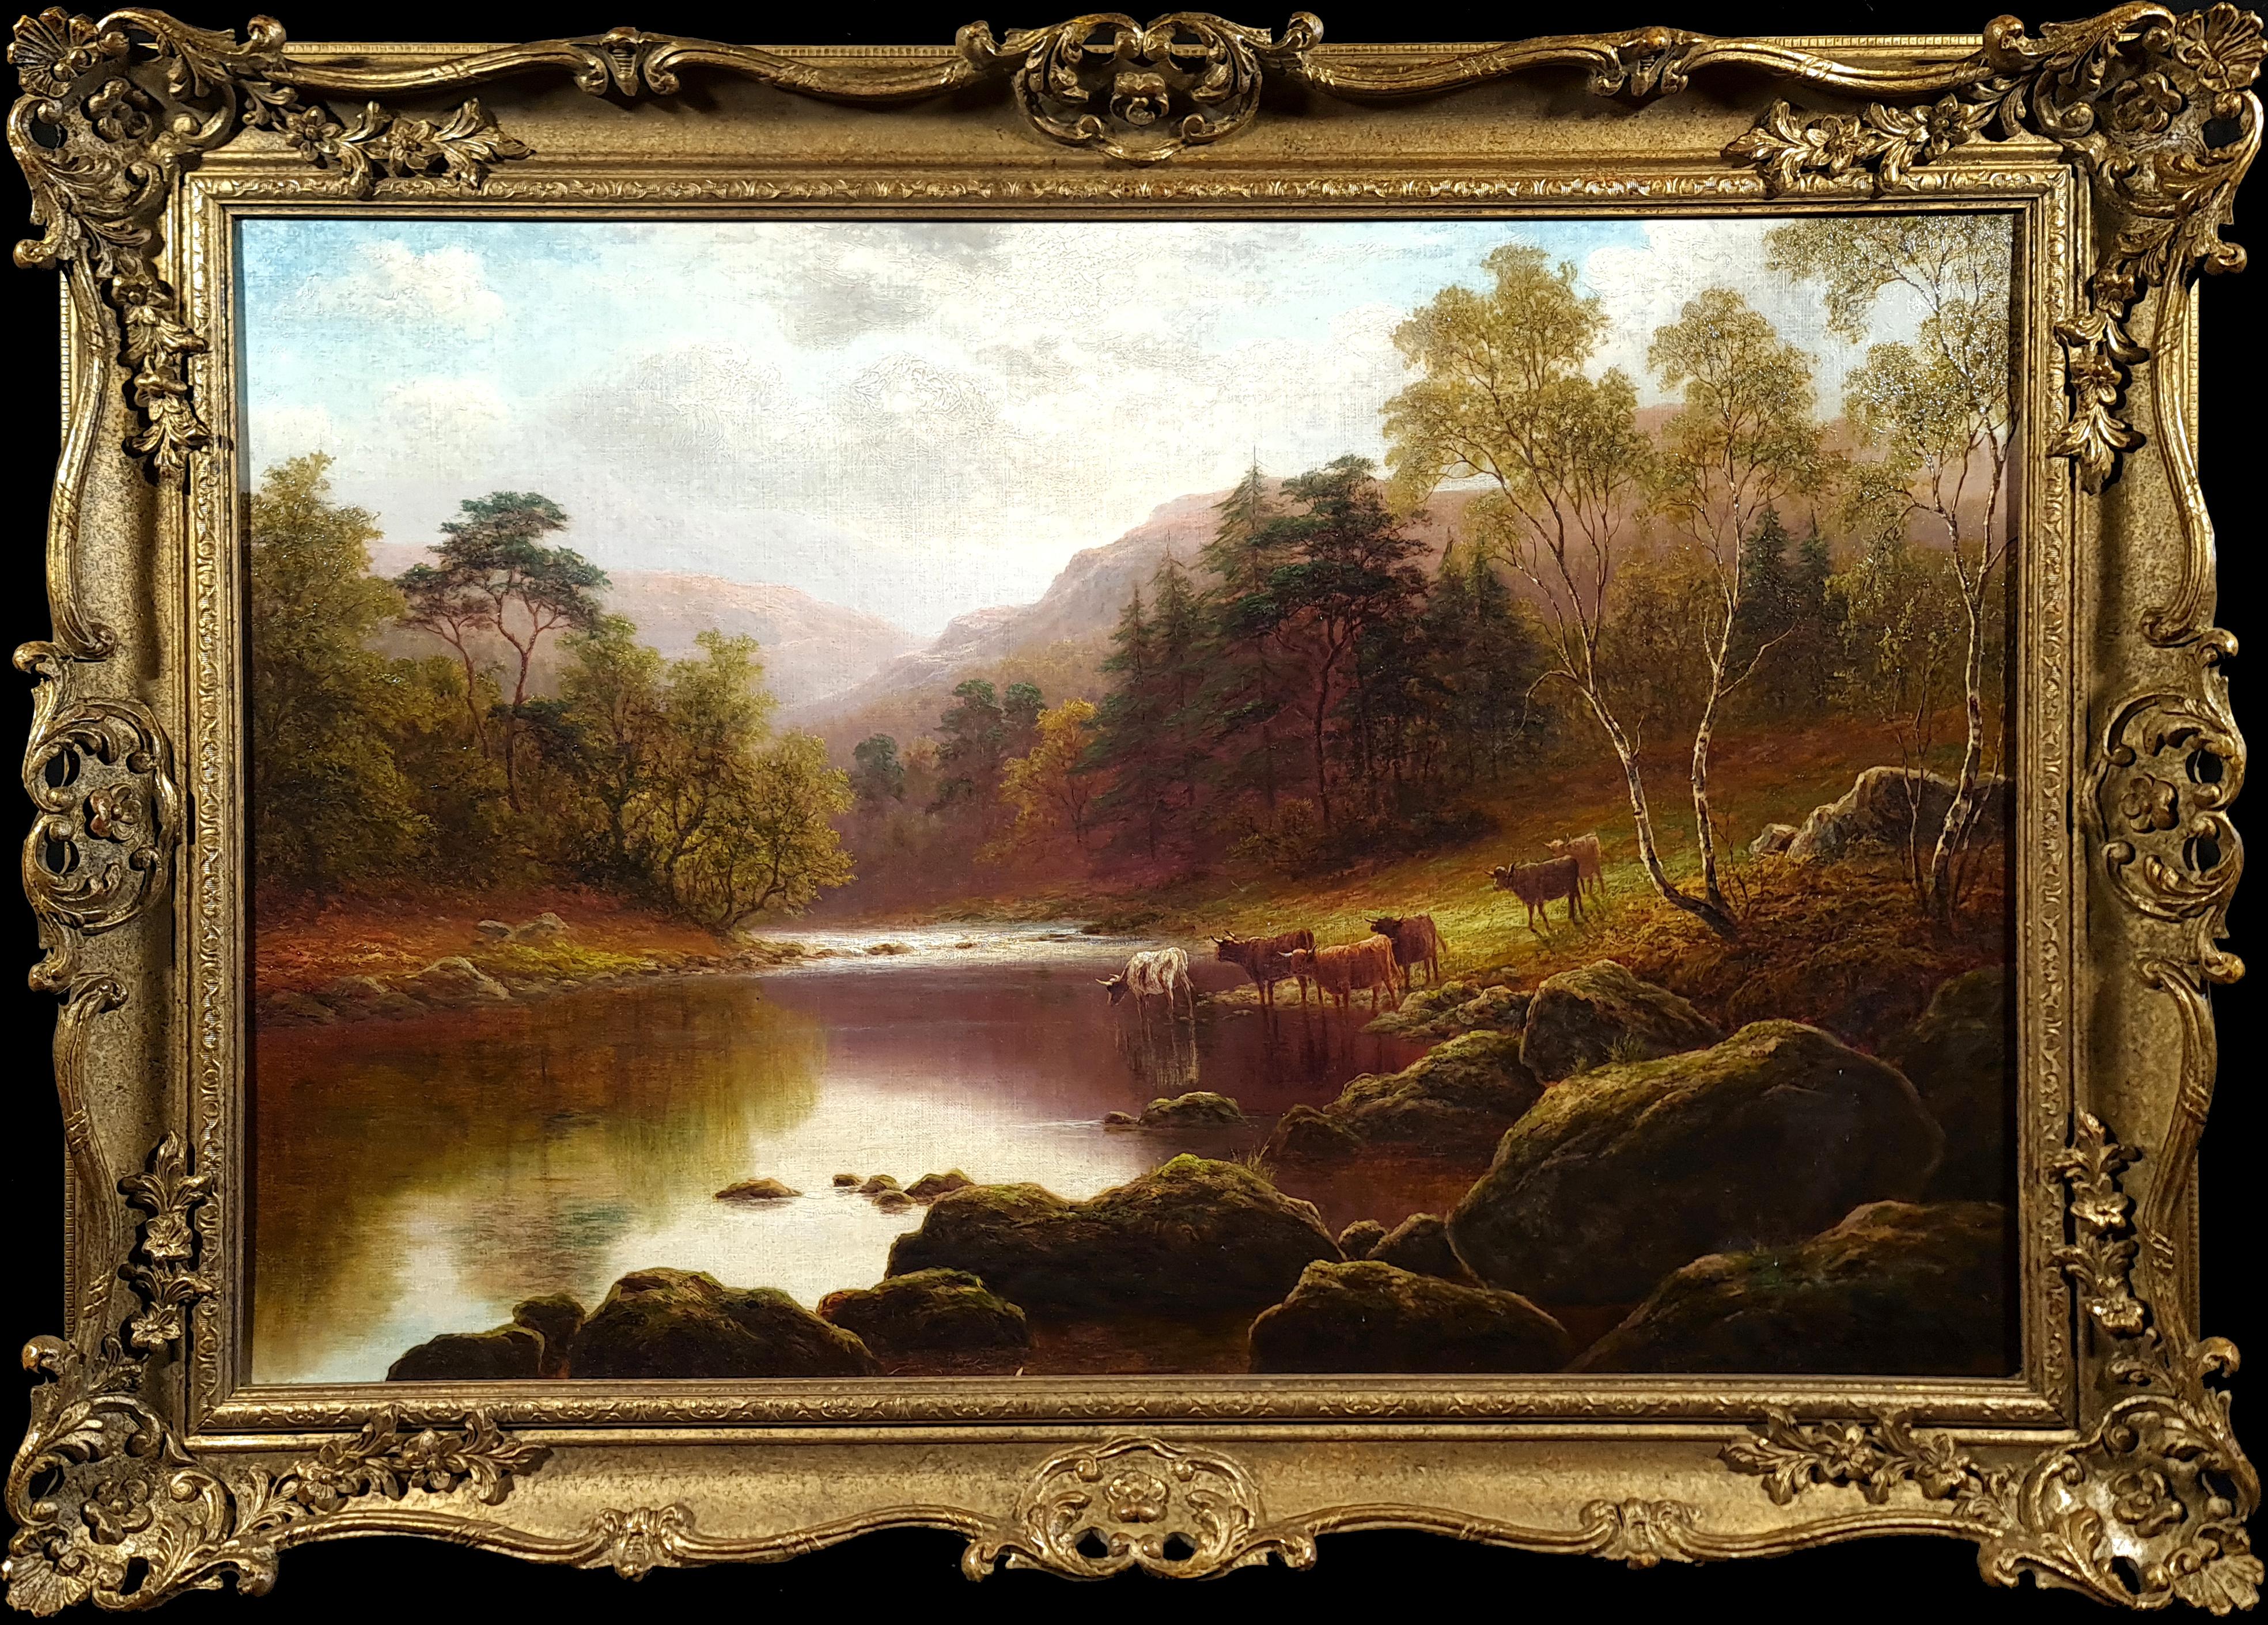 Landscape Painting William Mellor - The Wales and Wales, Nord du Pays de Galles